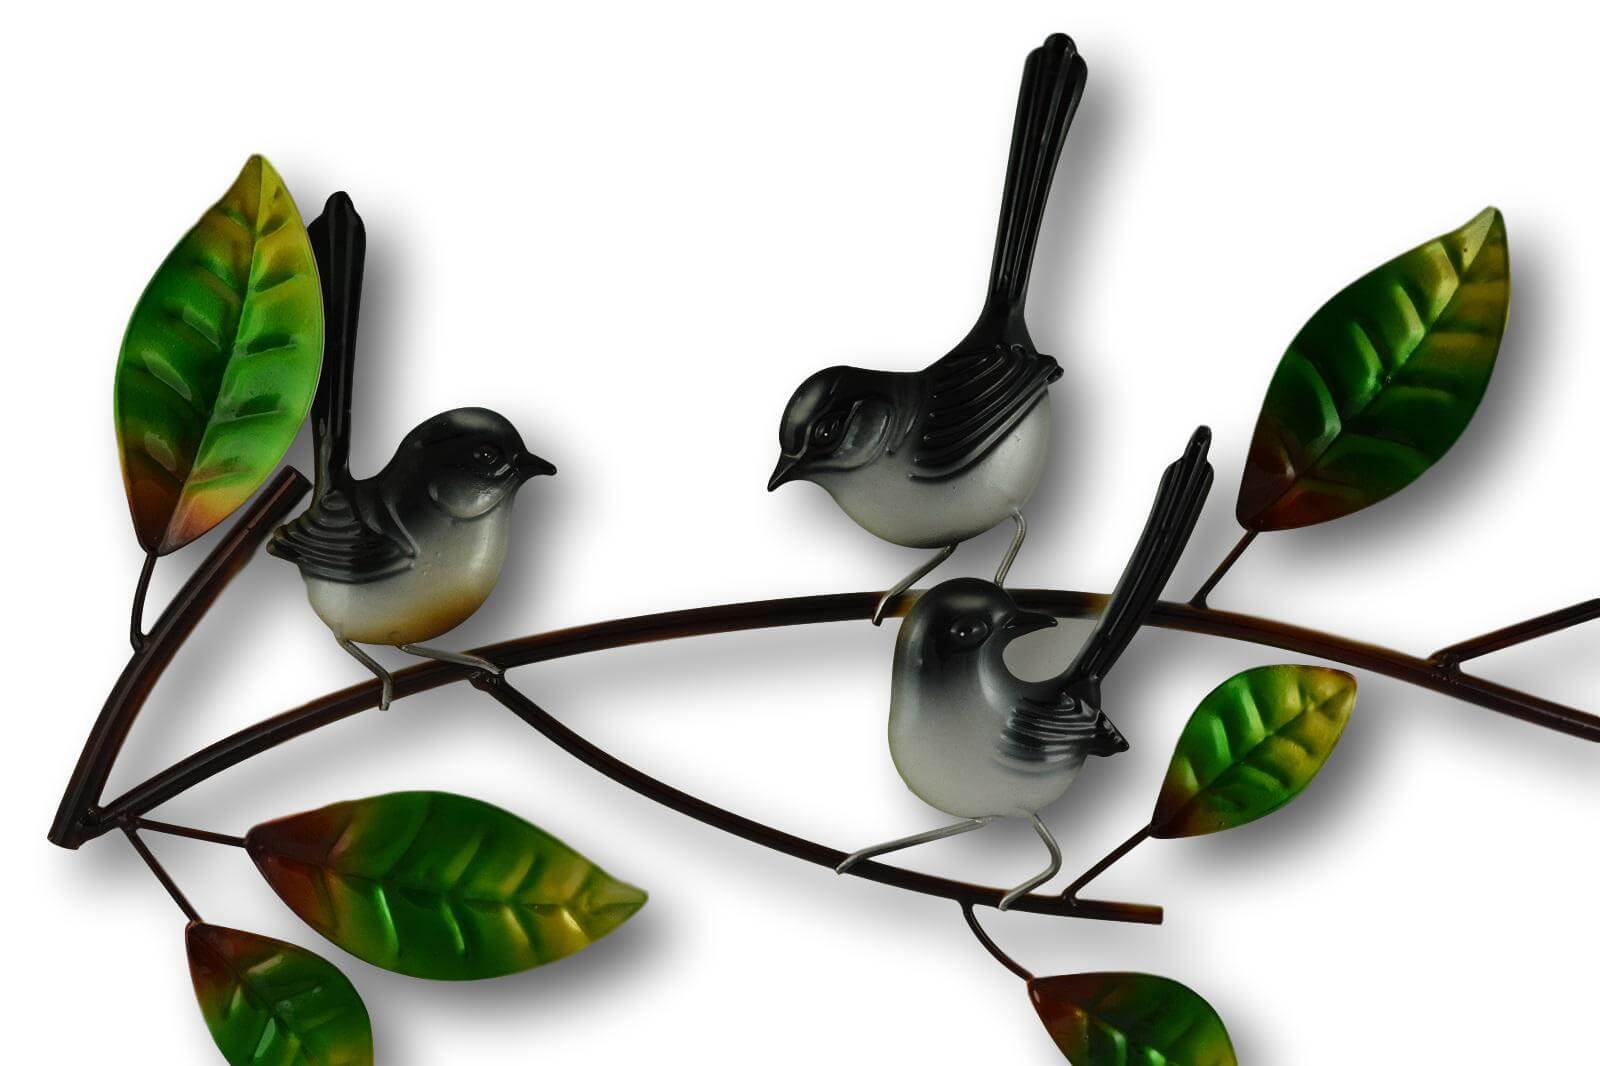 WILLIE WAGTAILS ON A BRANCH WALL ART - HANDMADE METAL ART + SINGING BOWLS AND MEDITATION